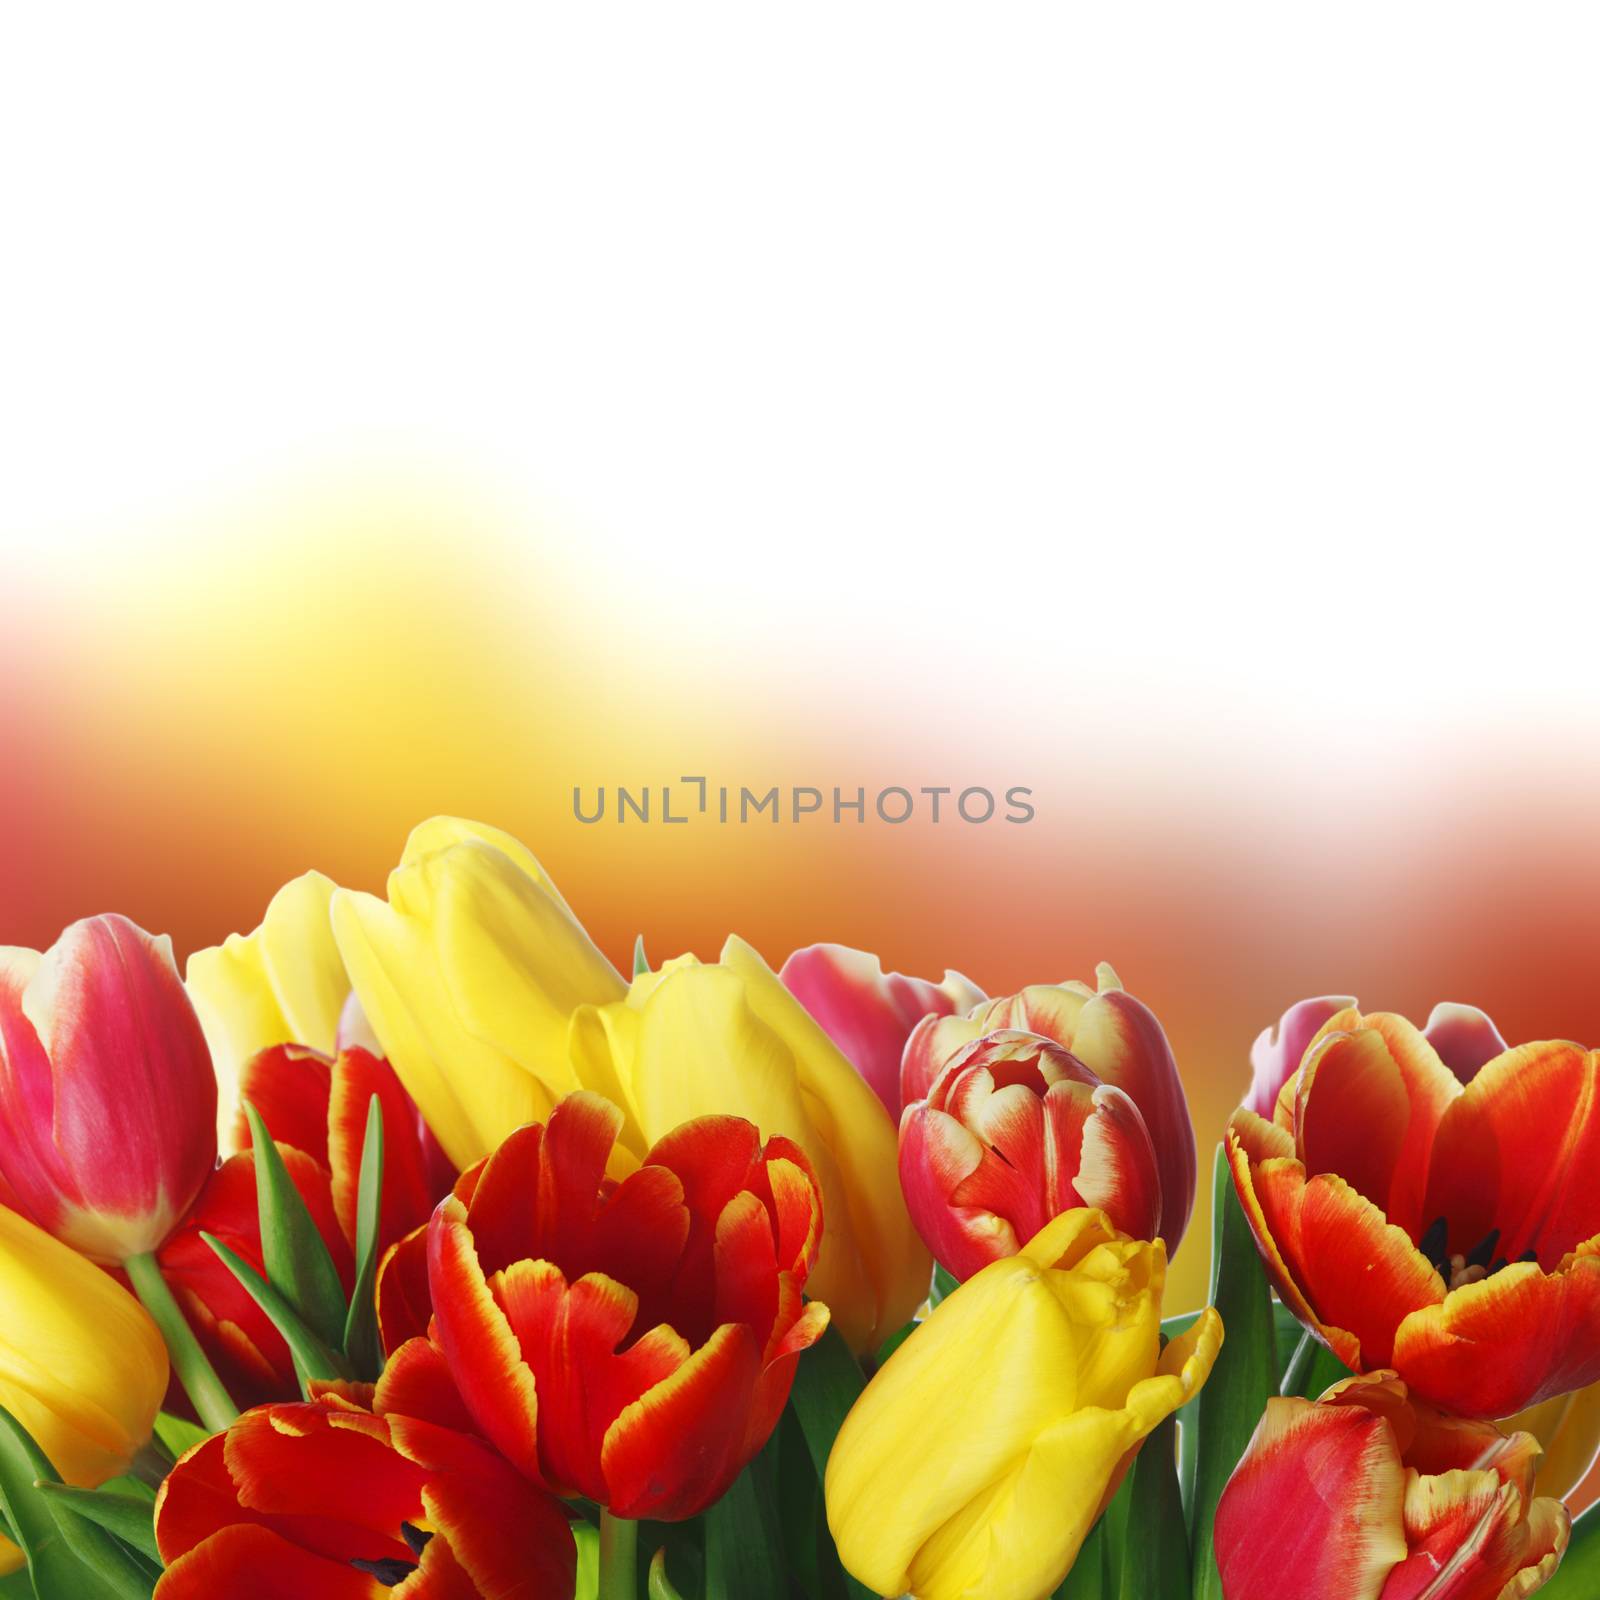 Photograph of bouquet of colorful tulips with white copy space